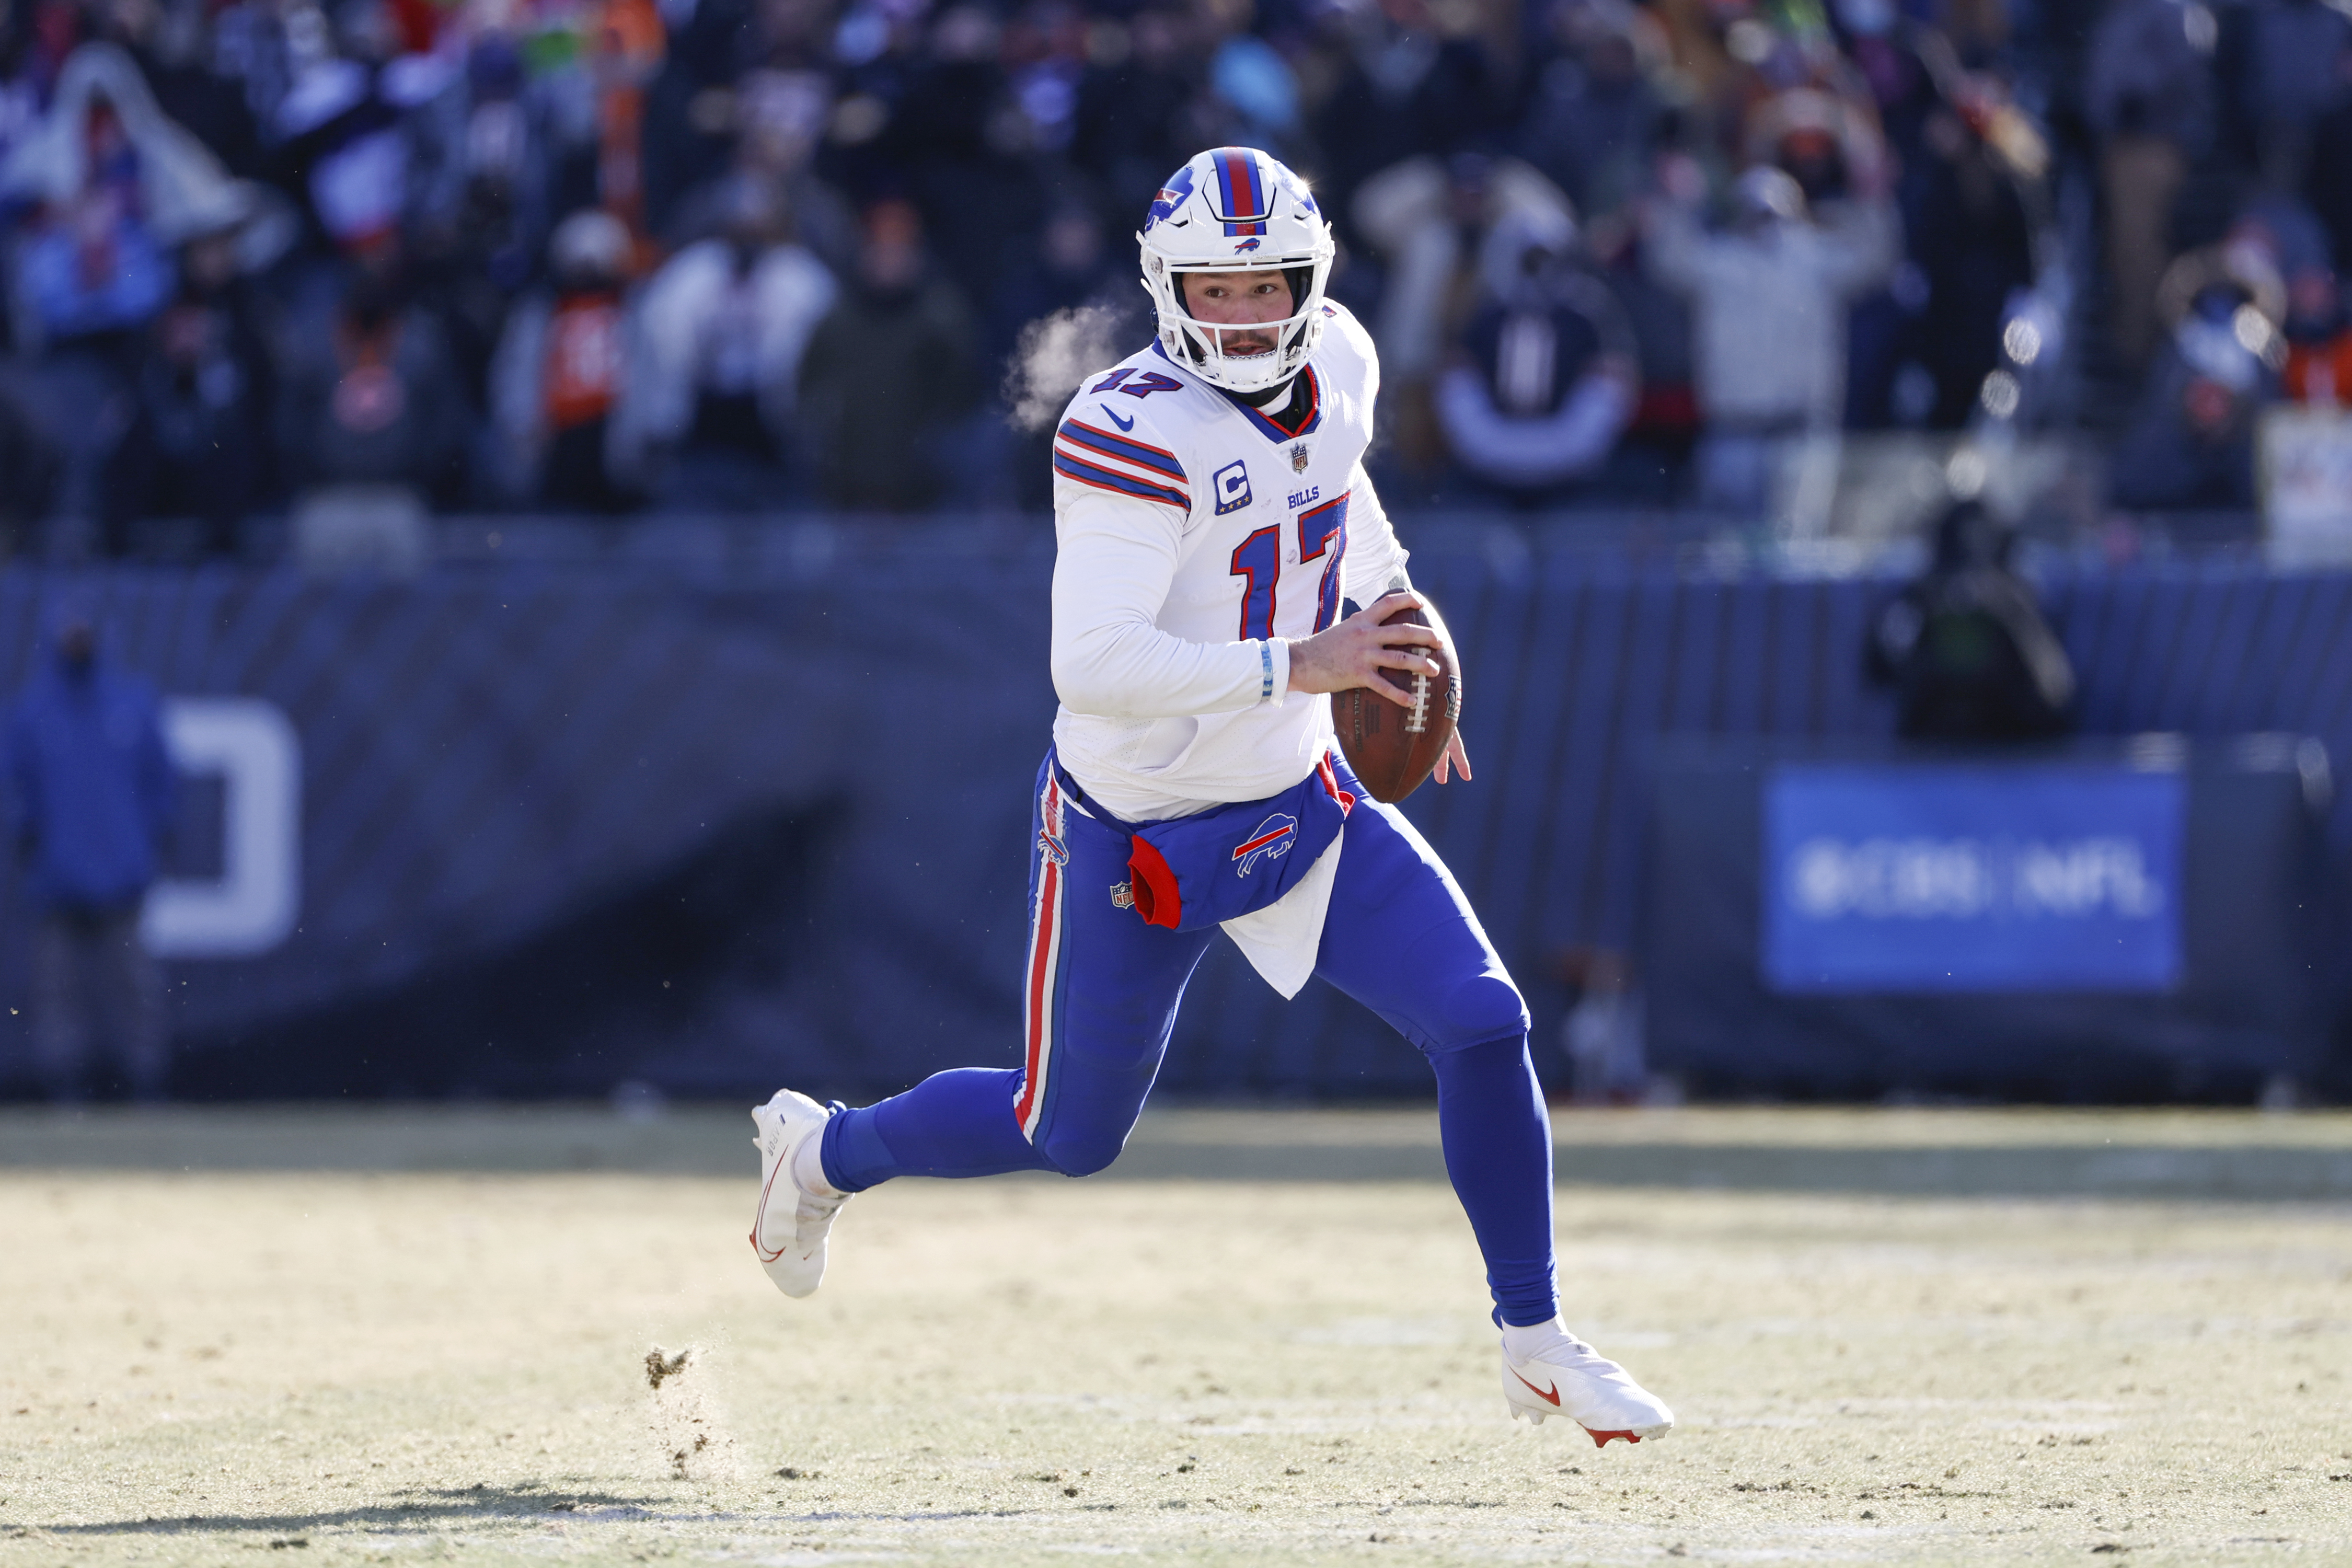 How Bengals DC Lou Anarumo confused Josh Allen and the Bills in convincing divisional  round playoff win 